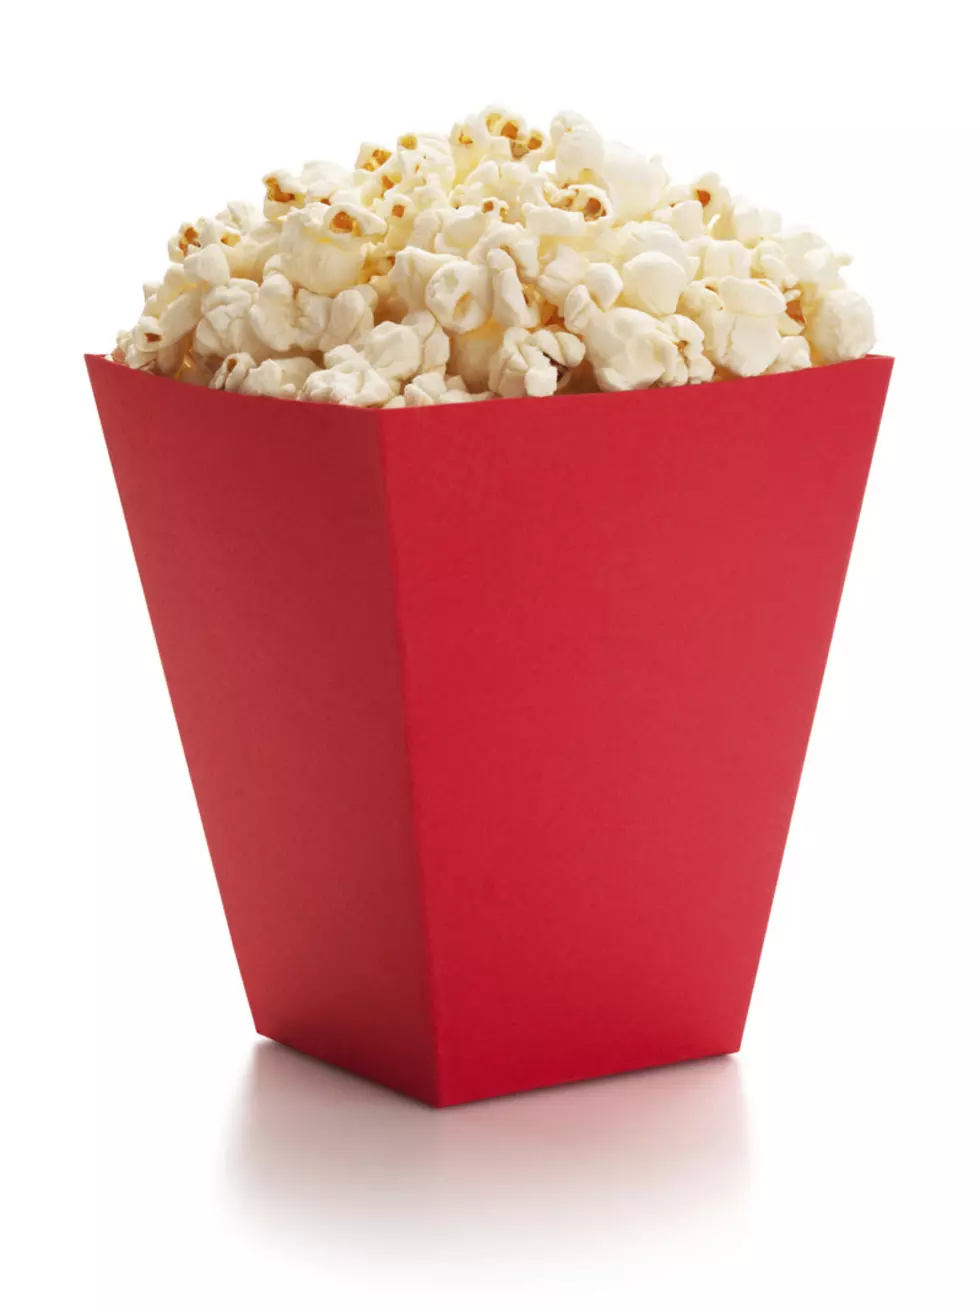 If You Enjoy Gourmet Popcorn, These Places Are Close To Rockford